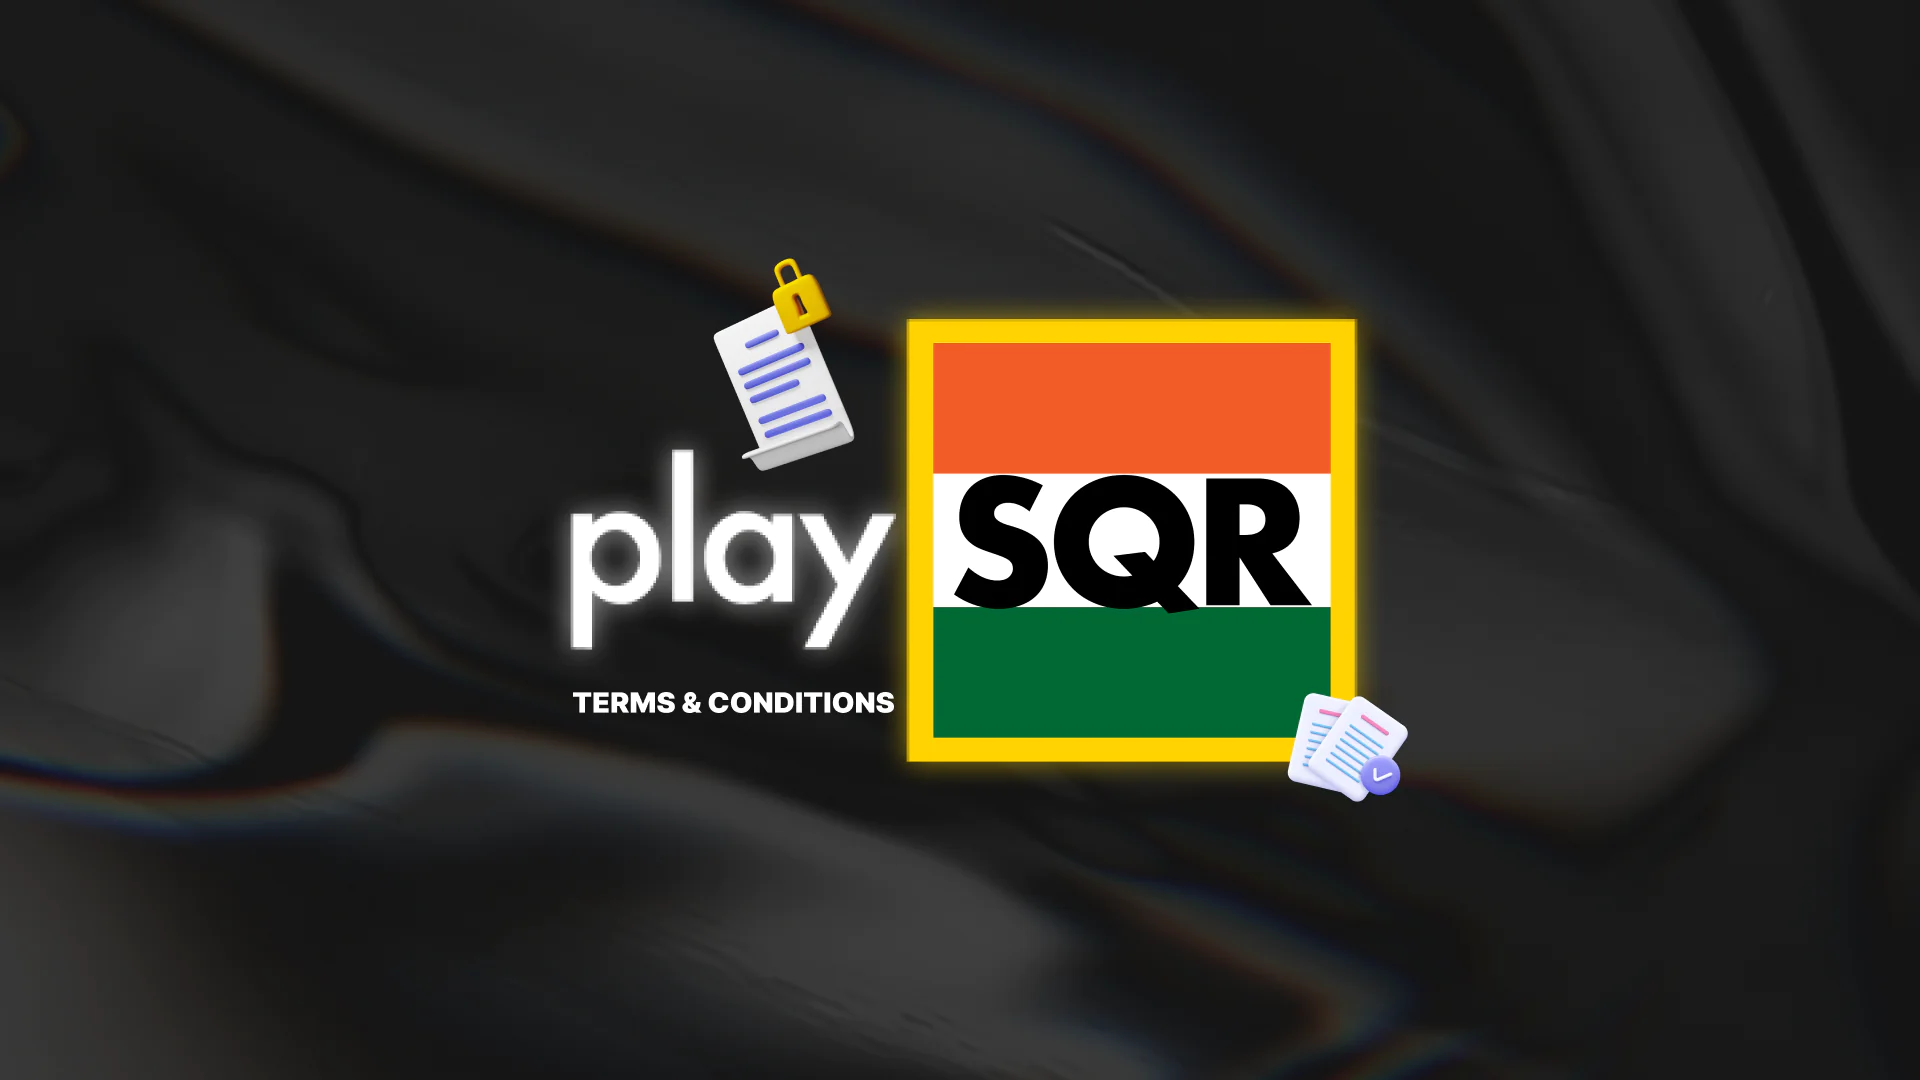 Learn more Information about PlaySQR Terms & Conditions